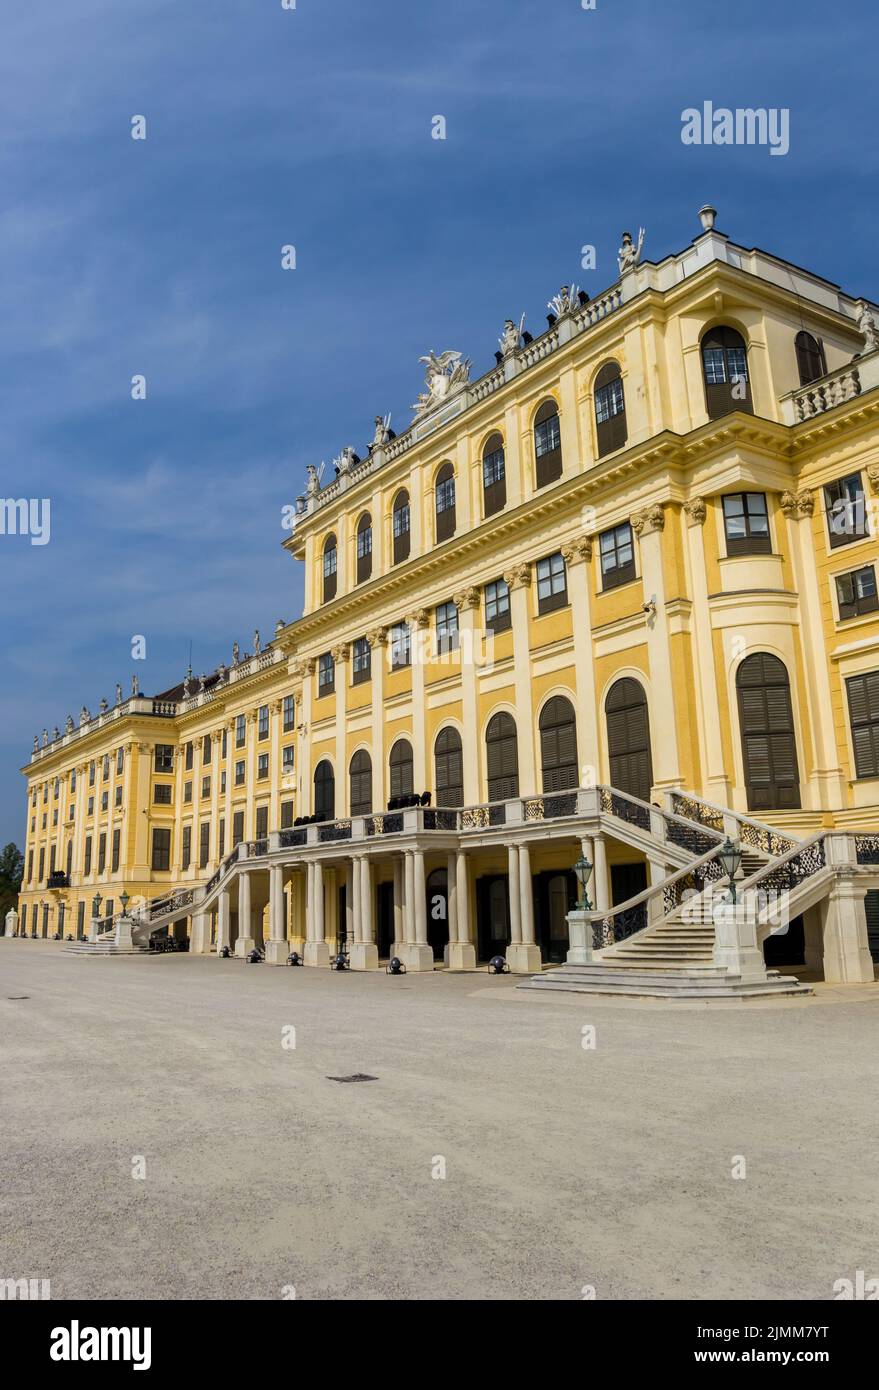 Staircases in front of the royal Schonbrunn palace in Vienna, Austria Stock Photo